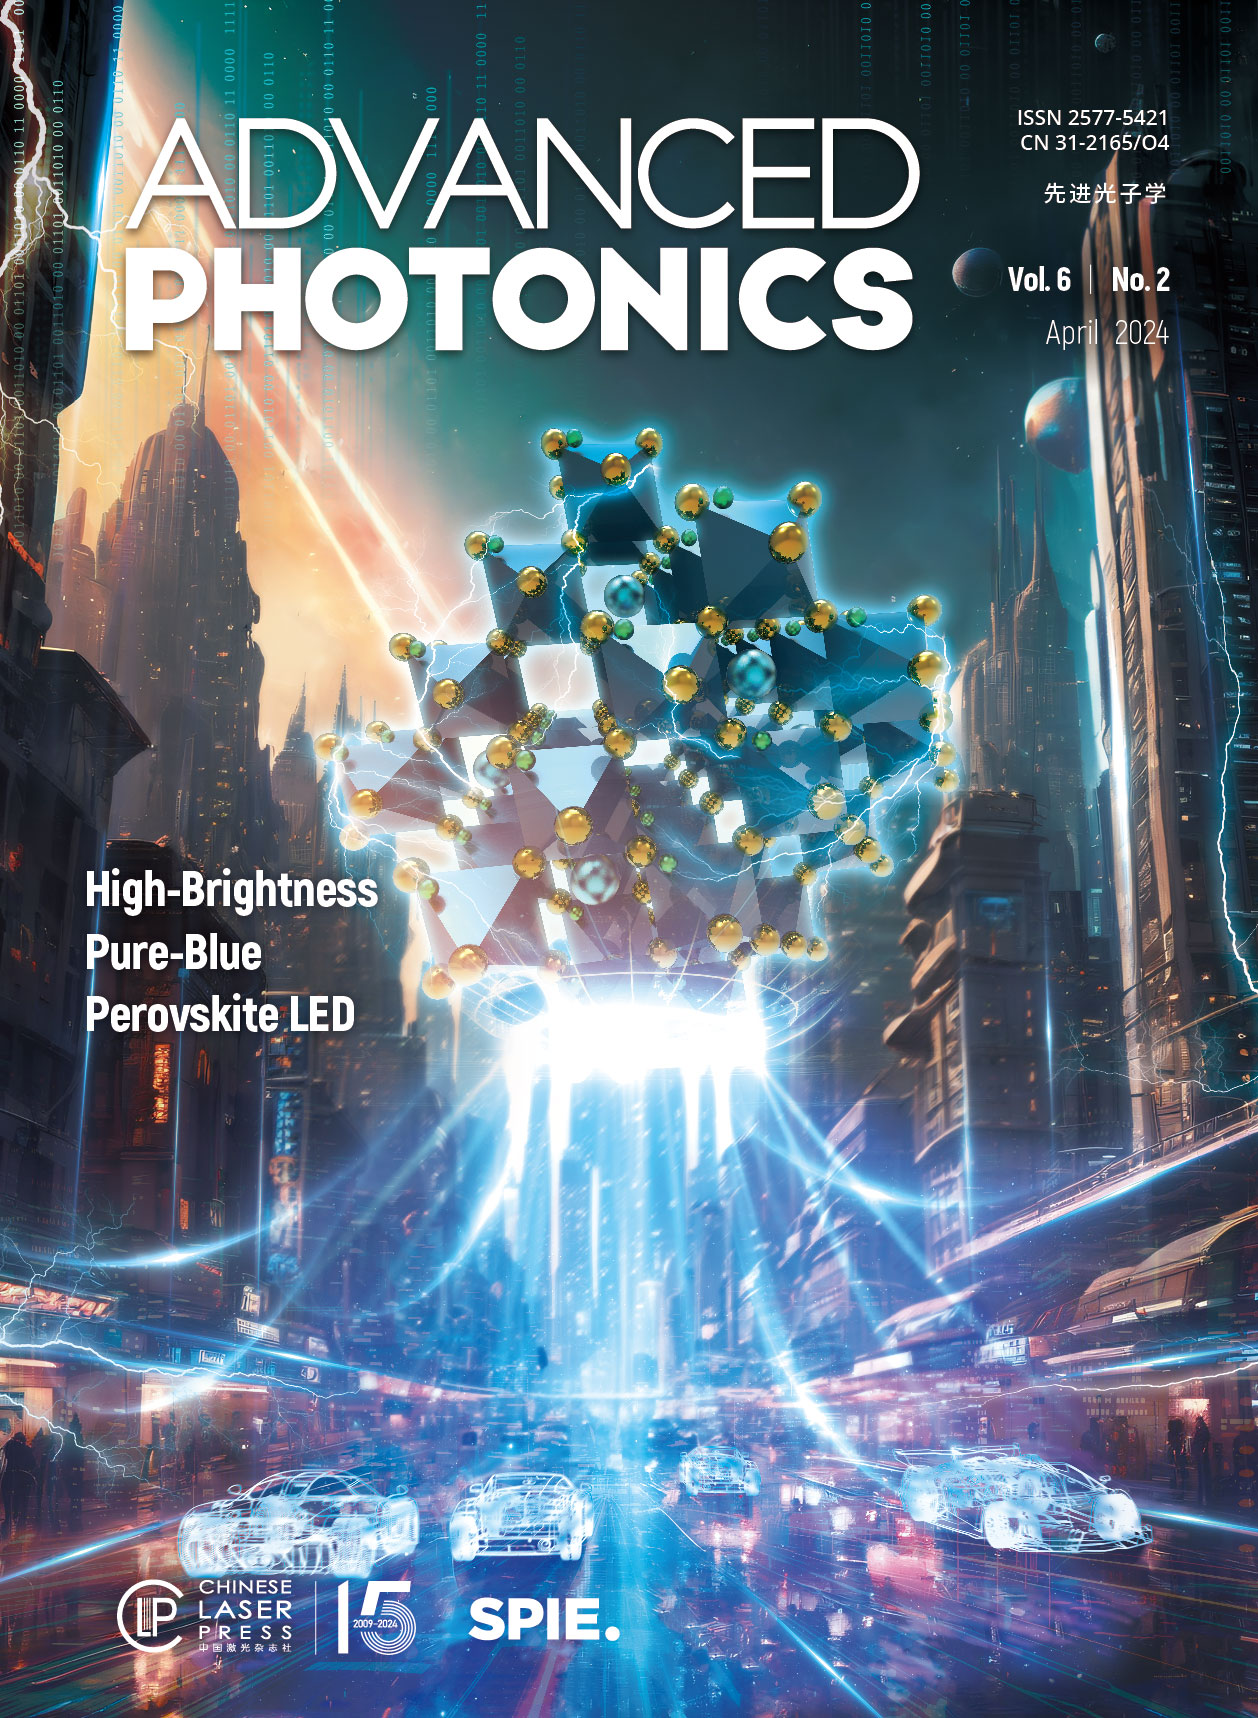 About the cover: Advanced Photonics Volume 6, Issue 2